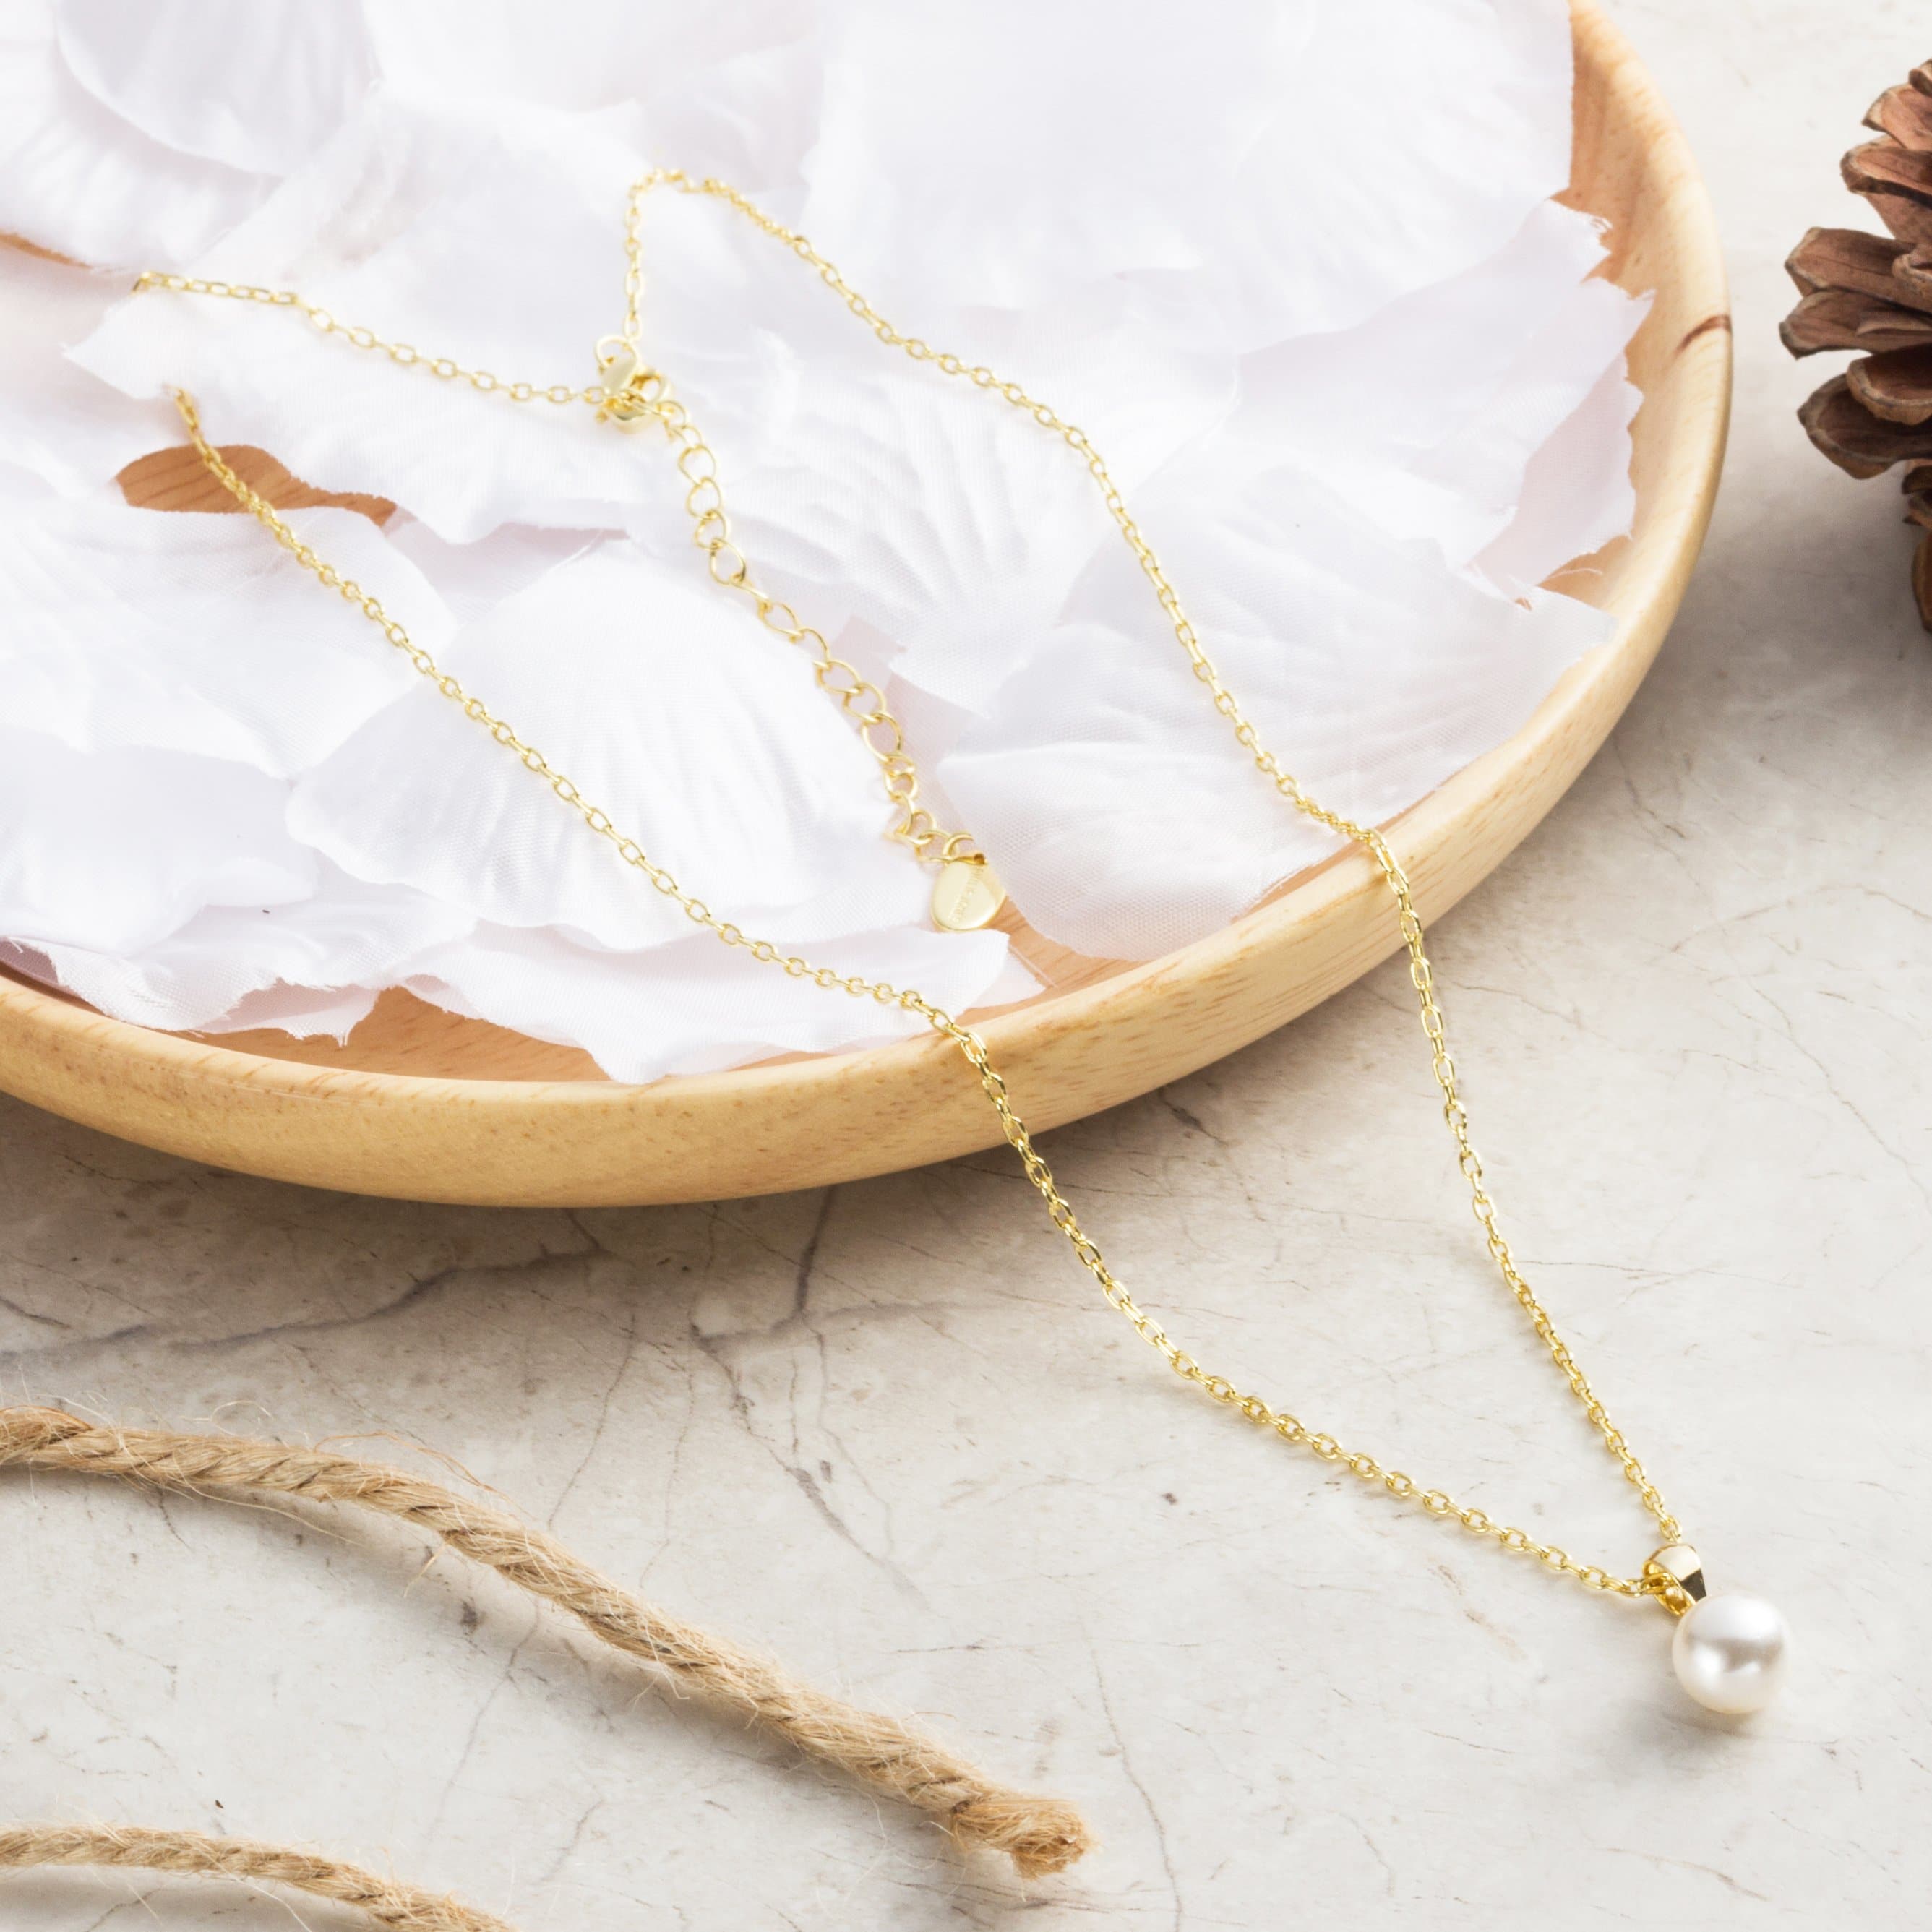 Gold Plated Shell Pearl Necklace